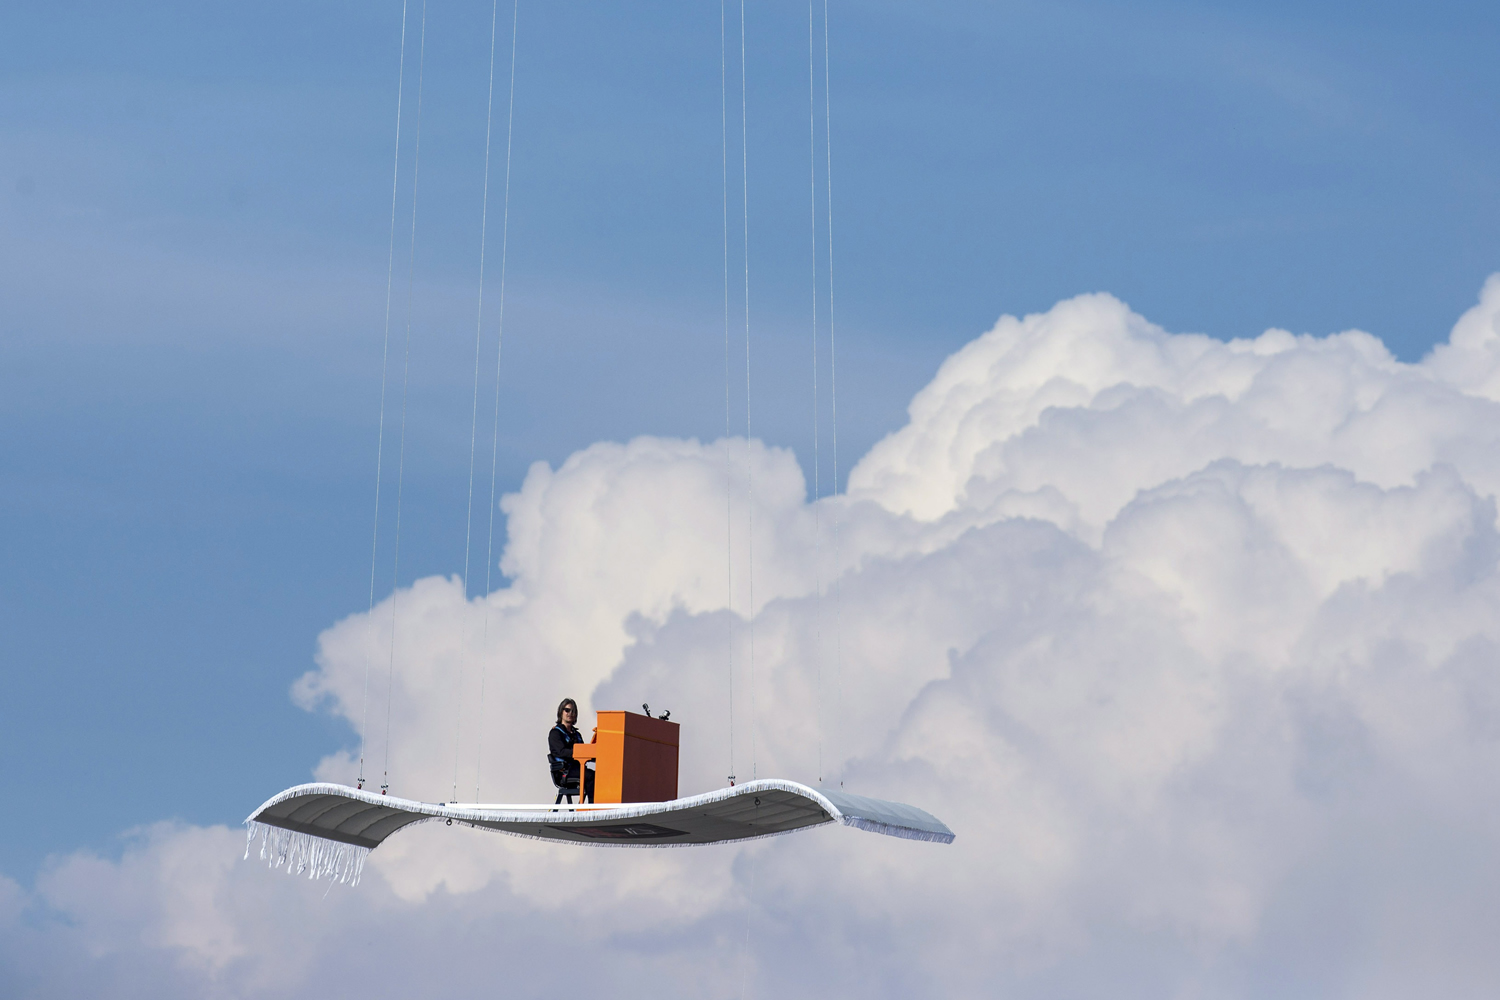 German pianist Stefan Aaron plays an orange piano on a flying carpet platform suspended from a helicopter.